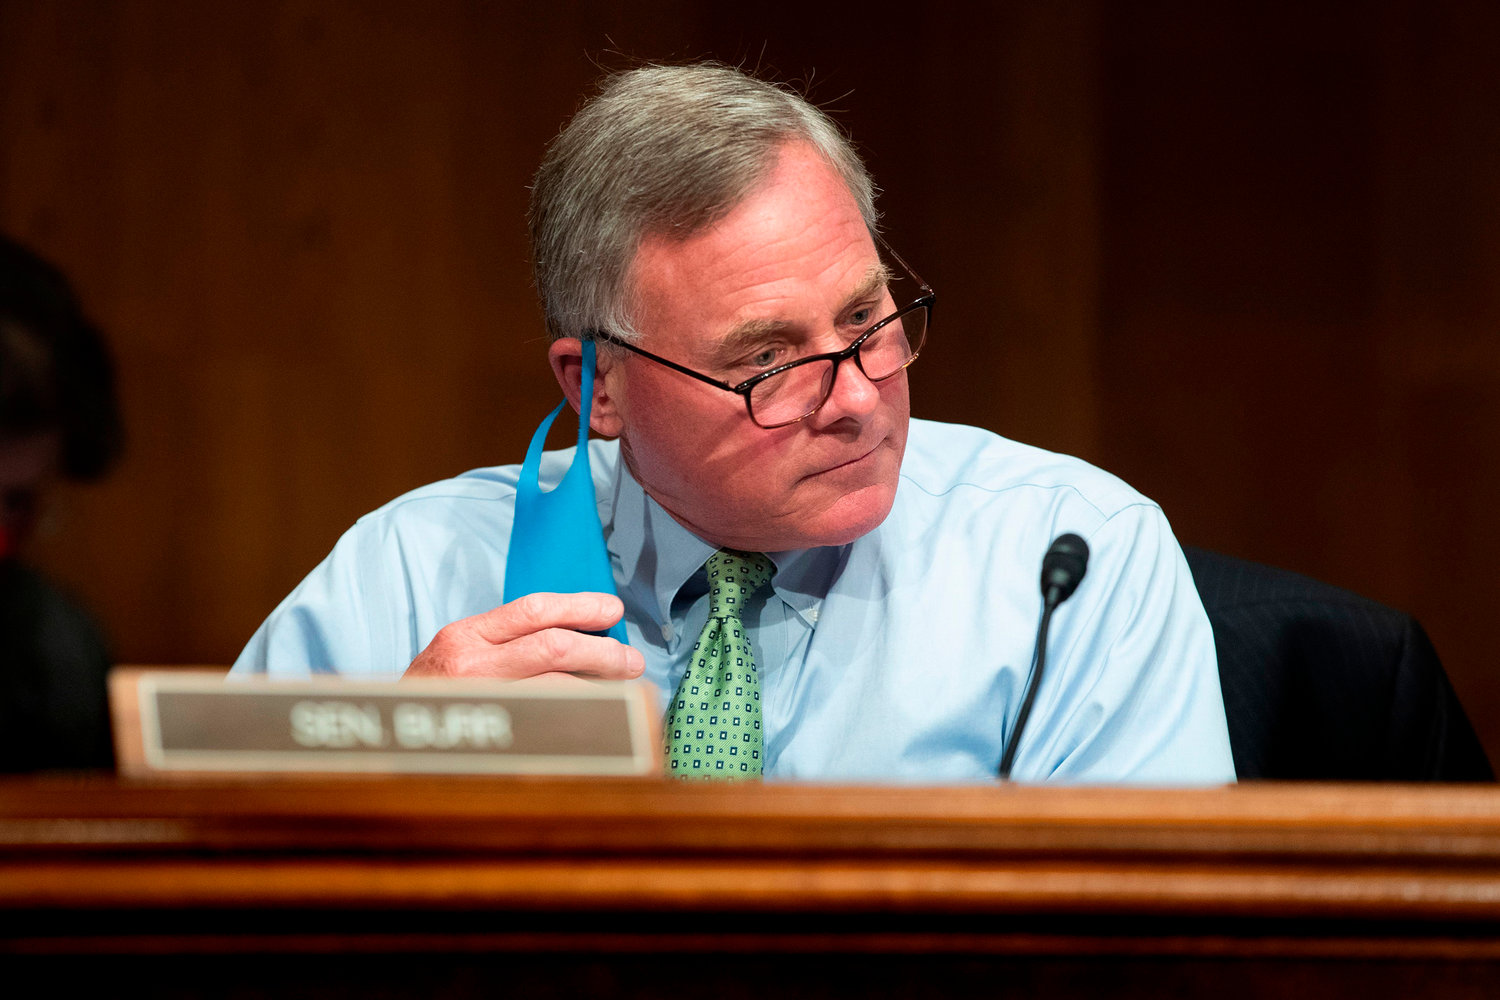 Sen. Richard Burr (R-NC) during the U.S. Senate Health, Education, Labor, and Pensions Committee hearing to examine the COVID-19 pandemic, on Capitol Hill in Washington, D.C., on June 23, 2020. (Micheael Reynolds/POOL/AFP/Getty Images/TNS)